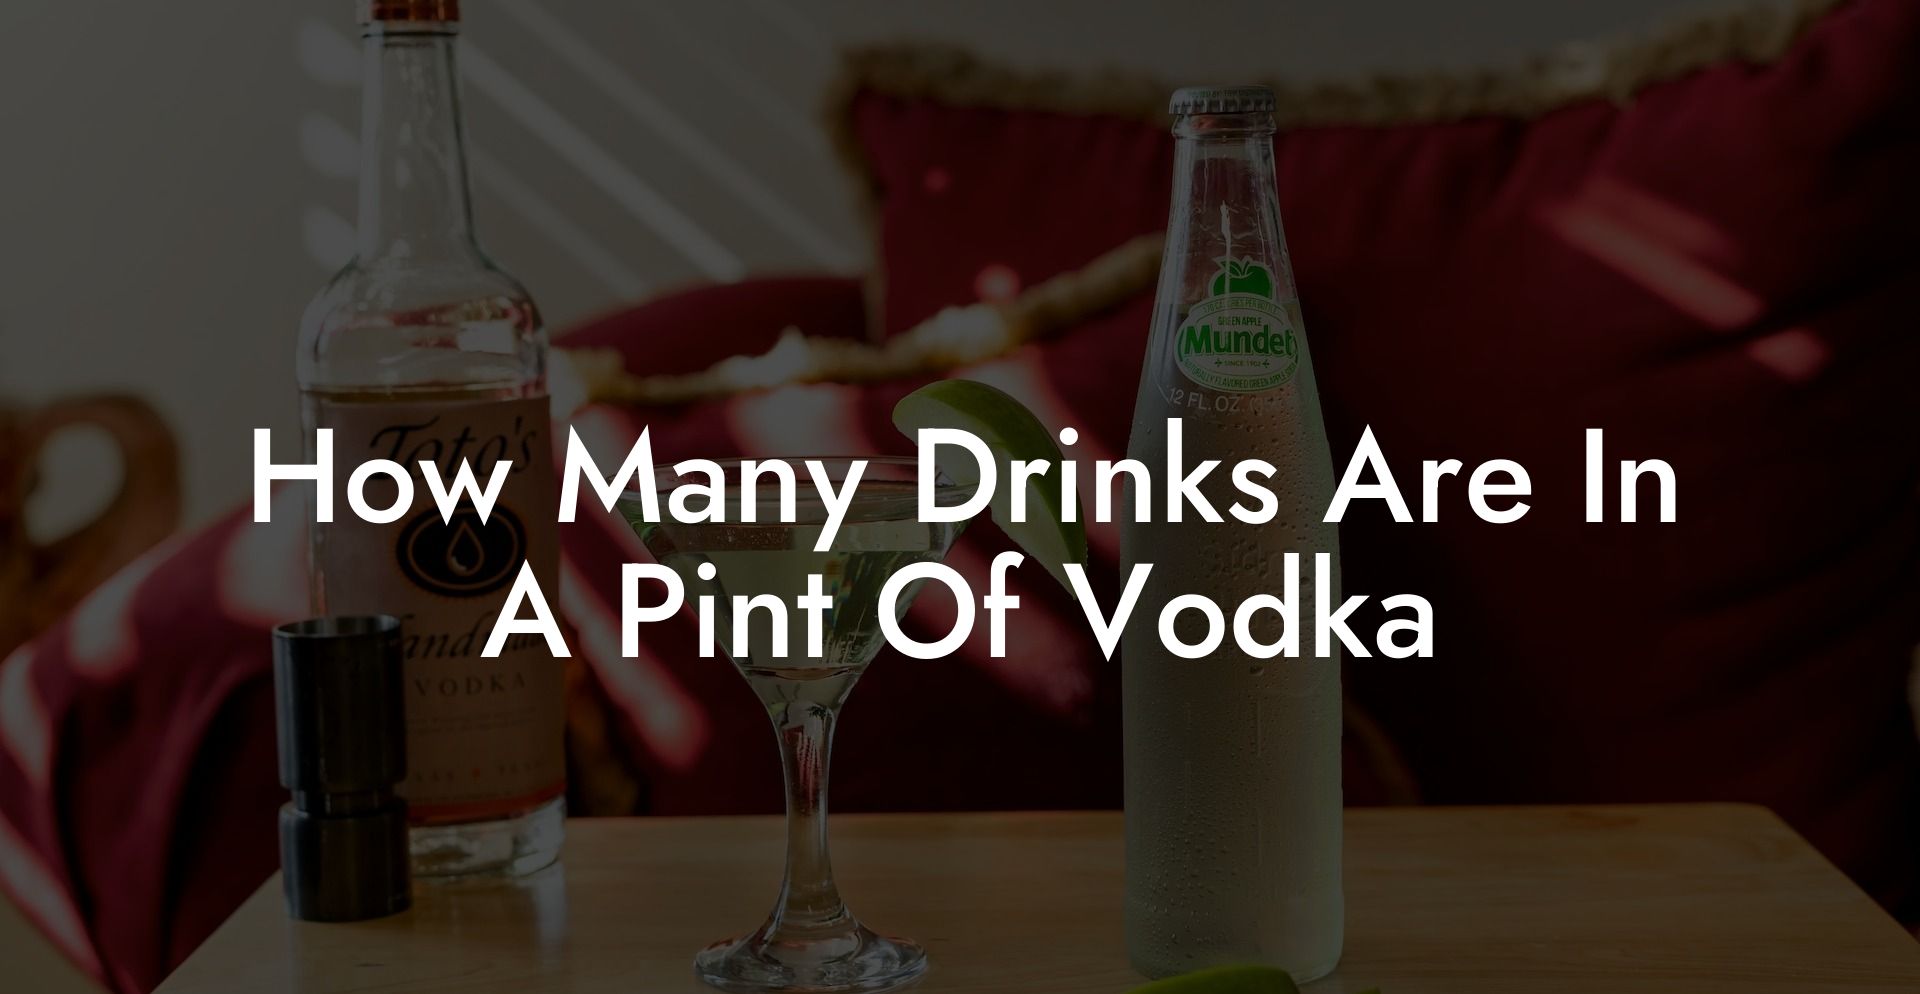 How Many Drinks Are In A Pint Of Vodka